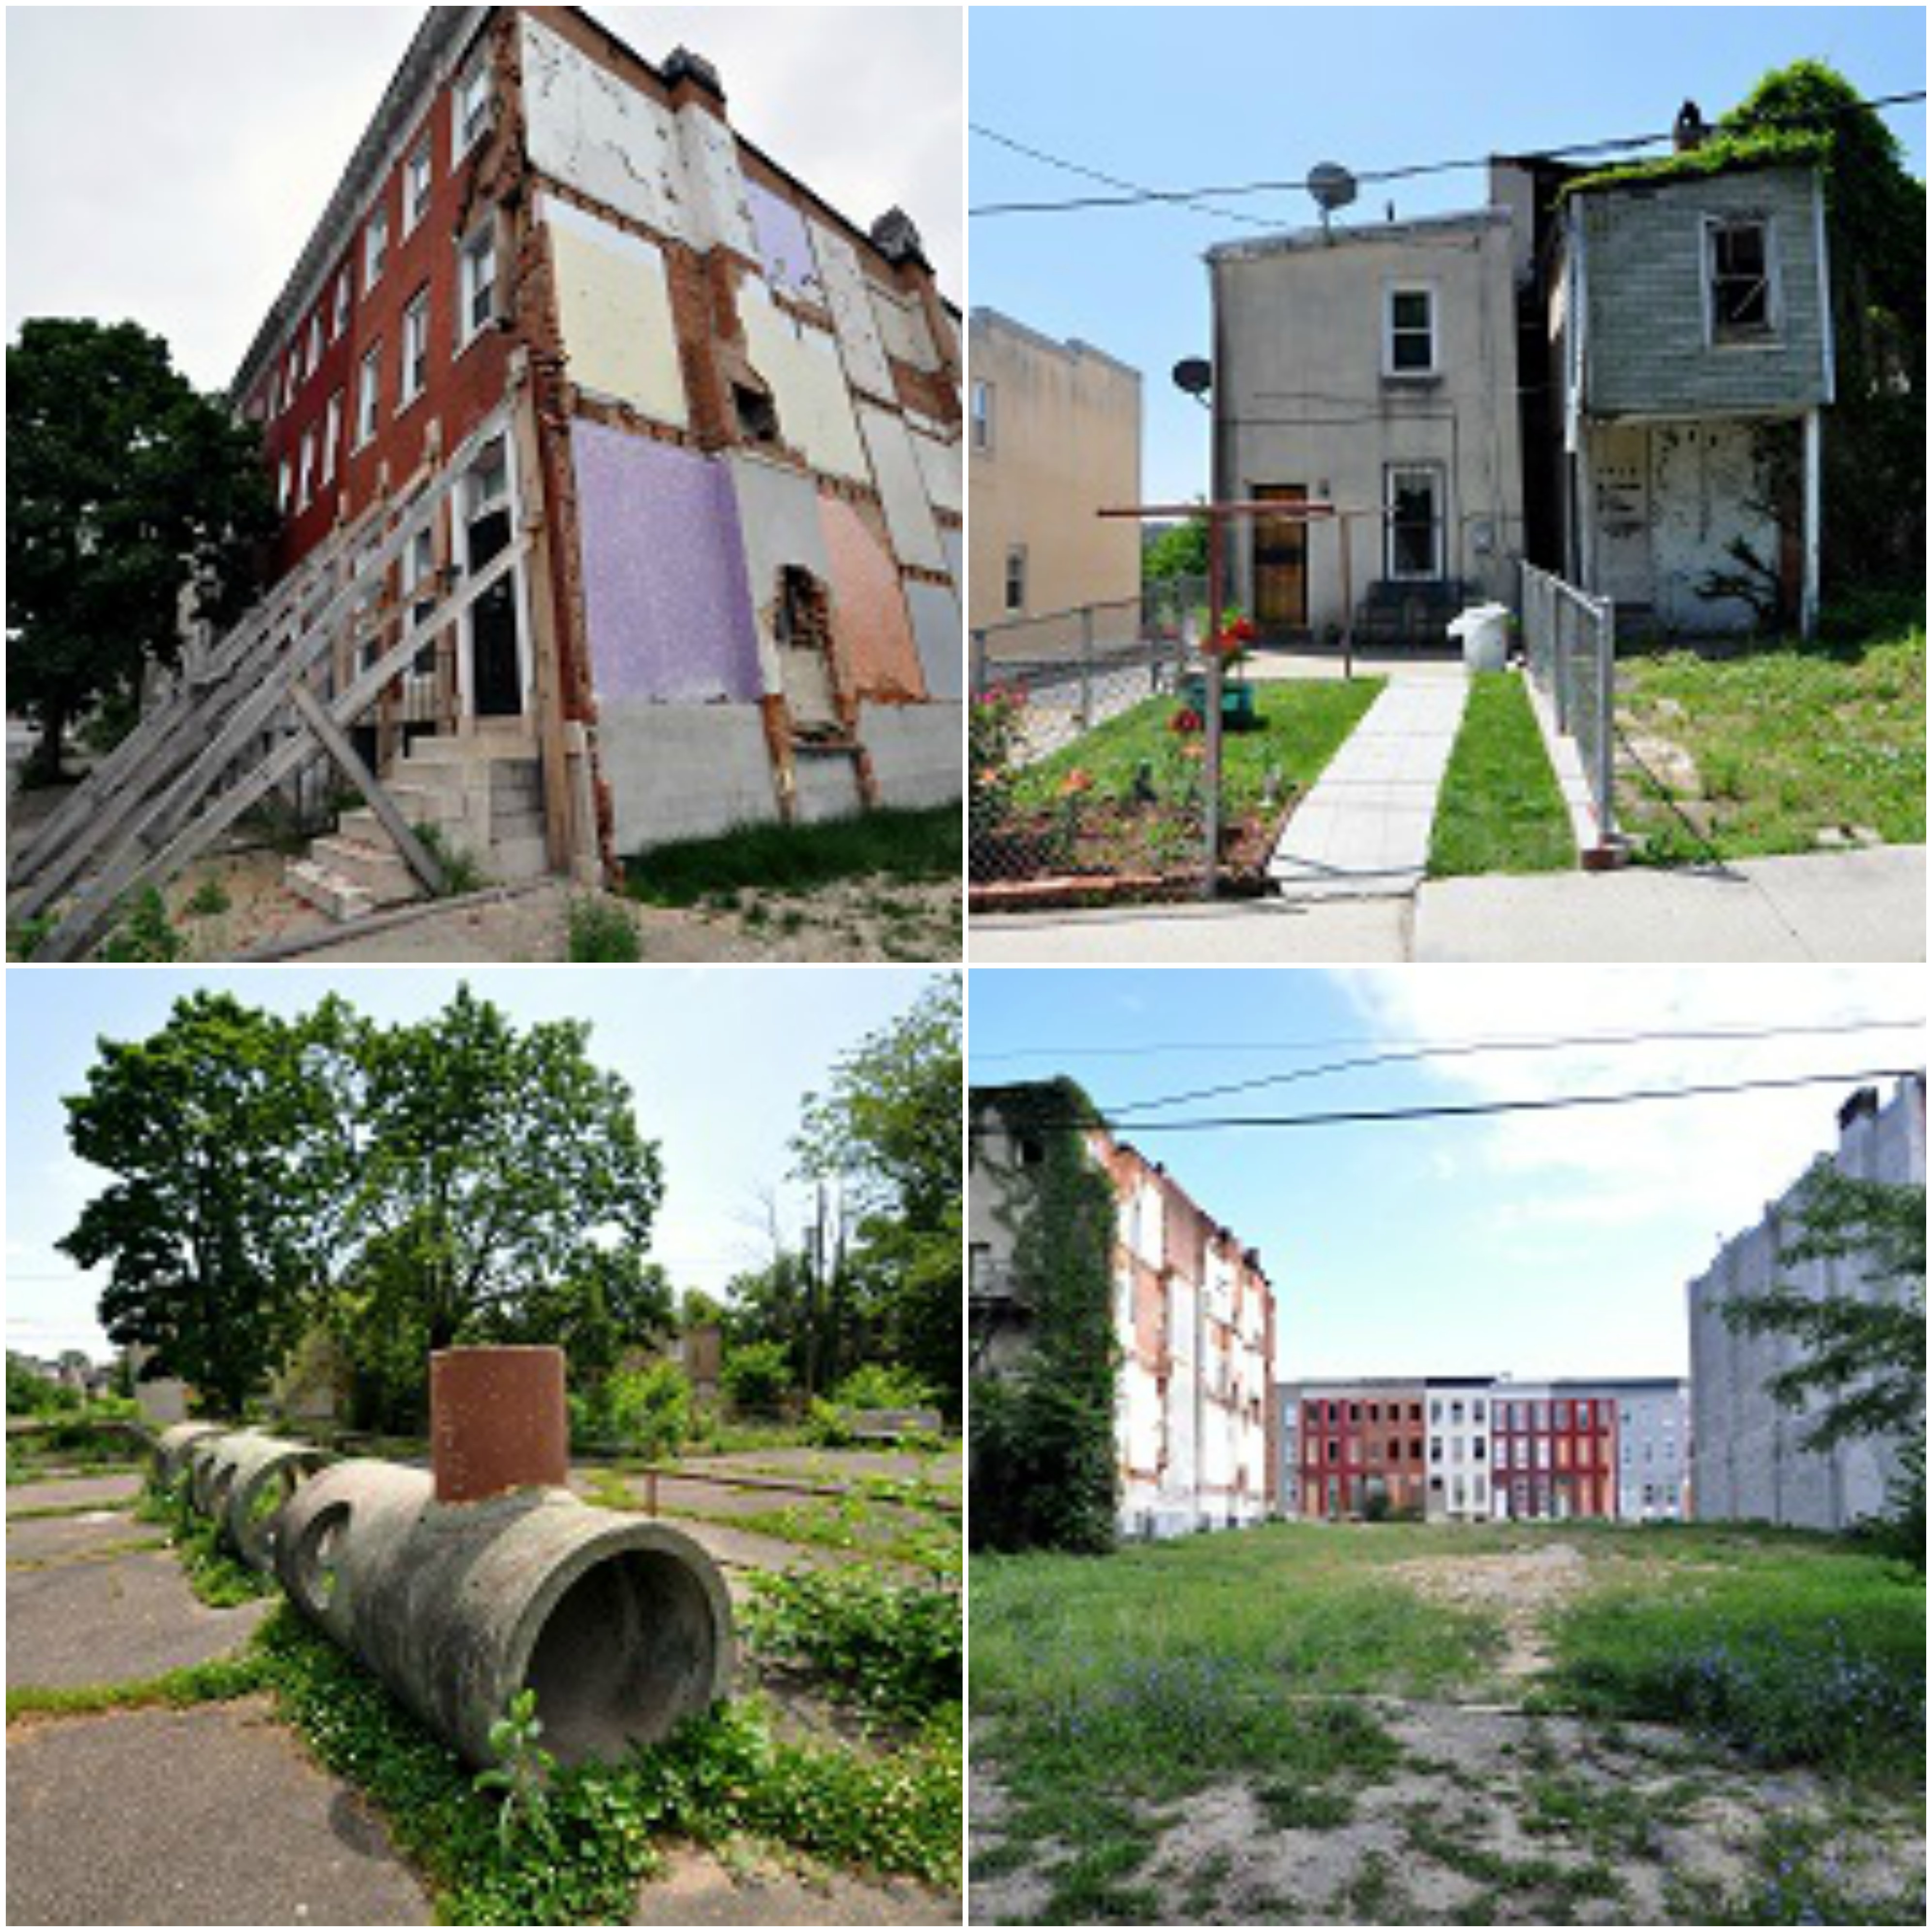 Owned/Abandoned: The drastic difference between an owned and a vacant property. Imagine what could be if more houses were revitalized and made into homes.

Failing House: Rowhouses are meant to support each other. When one is demolished, it threatens the structural integrity of those around it. In this case, a neighboring house was demolished, the new external wall was left unreinforced, and a homeowner was left unsupported.

Playground: Leftover concrete sewer pipes were repurposed as playground equipment during the 1960's installation of inner block parks in West Baltimore.

Rowhouses & Lots: The view from an inner block park to the adjacent street wall through vacant lots. What causes these spaces in the first place? And who participates in, and benefits from, outside intervention?